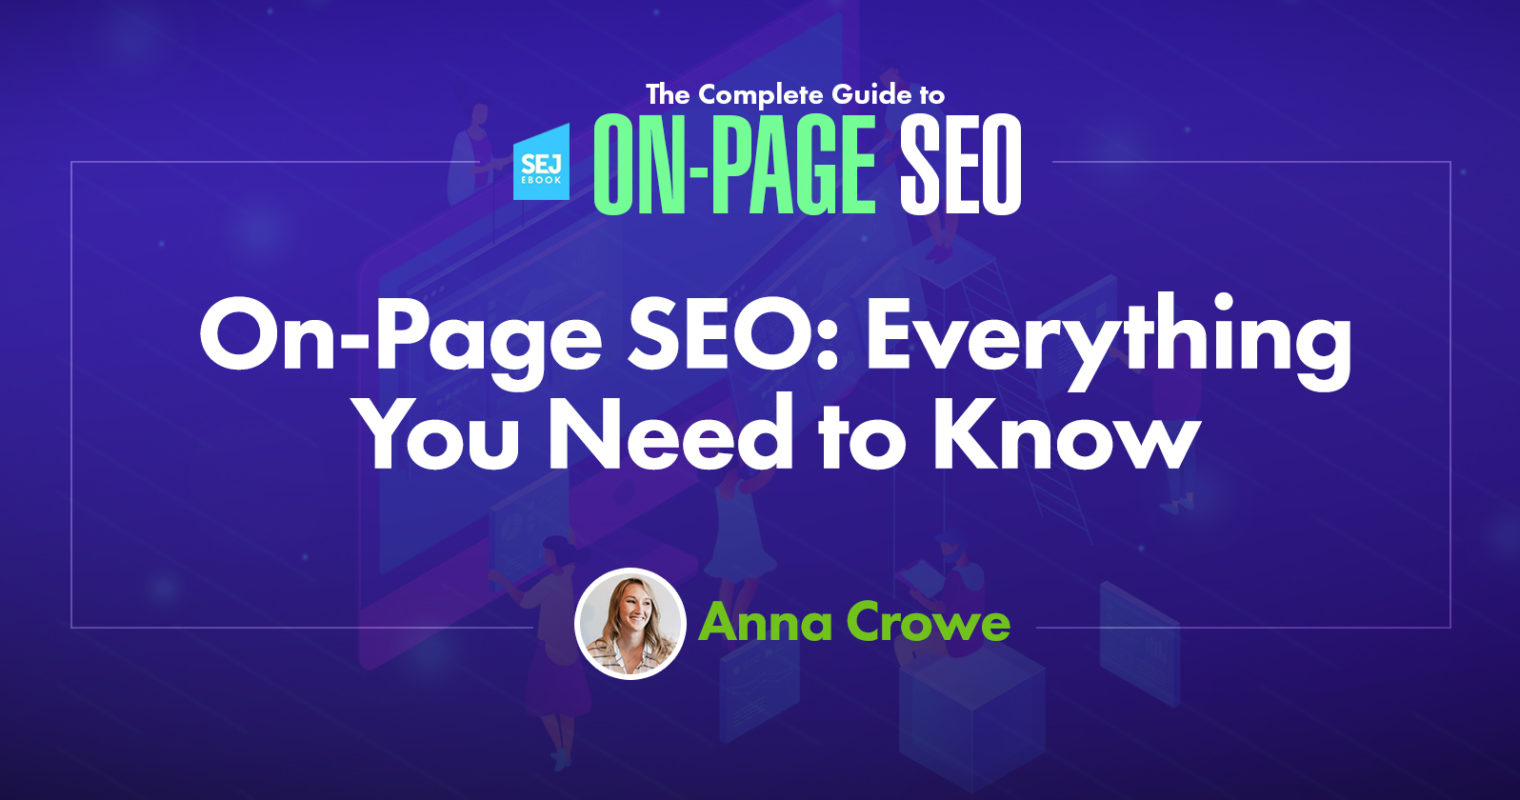 On-Page SEO Guide by Search Engine Journal